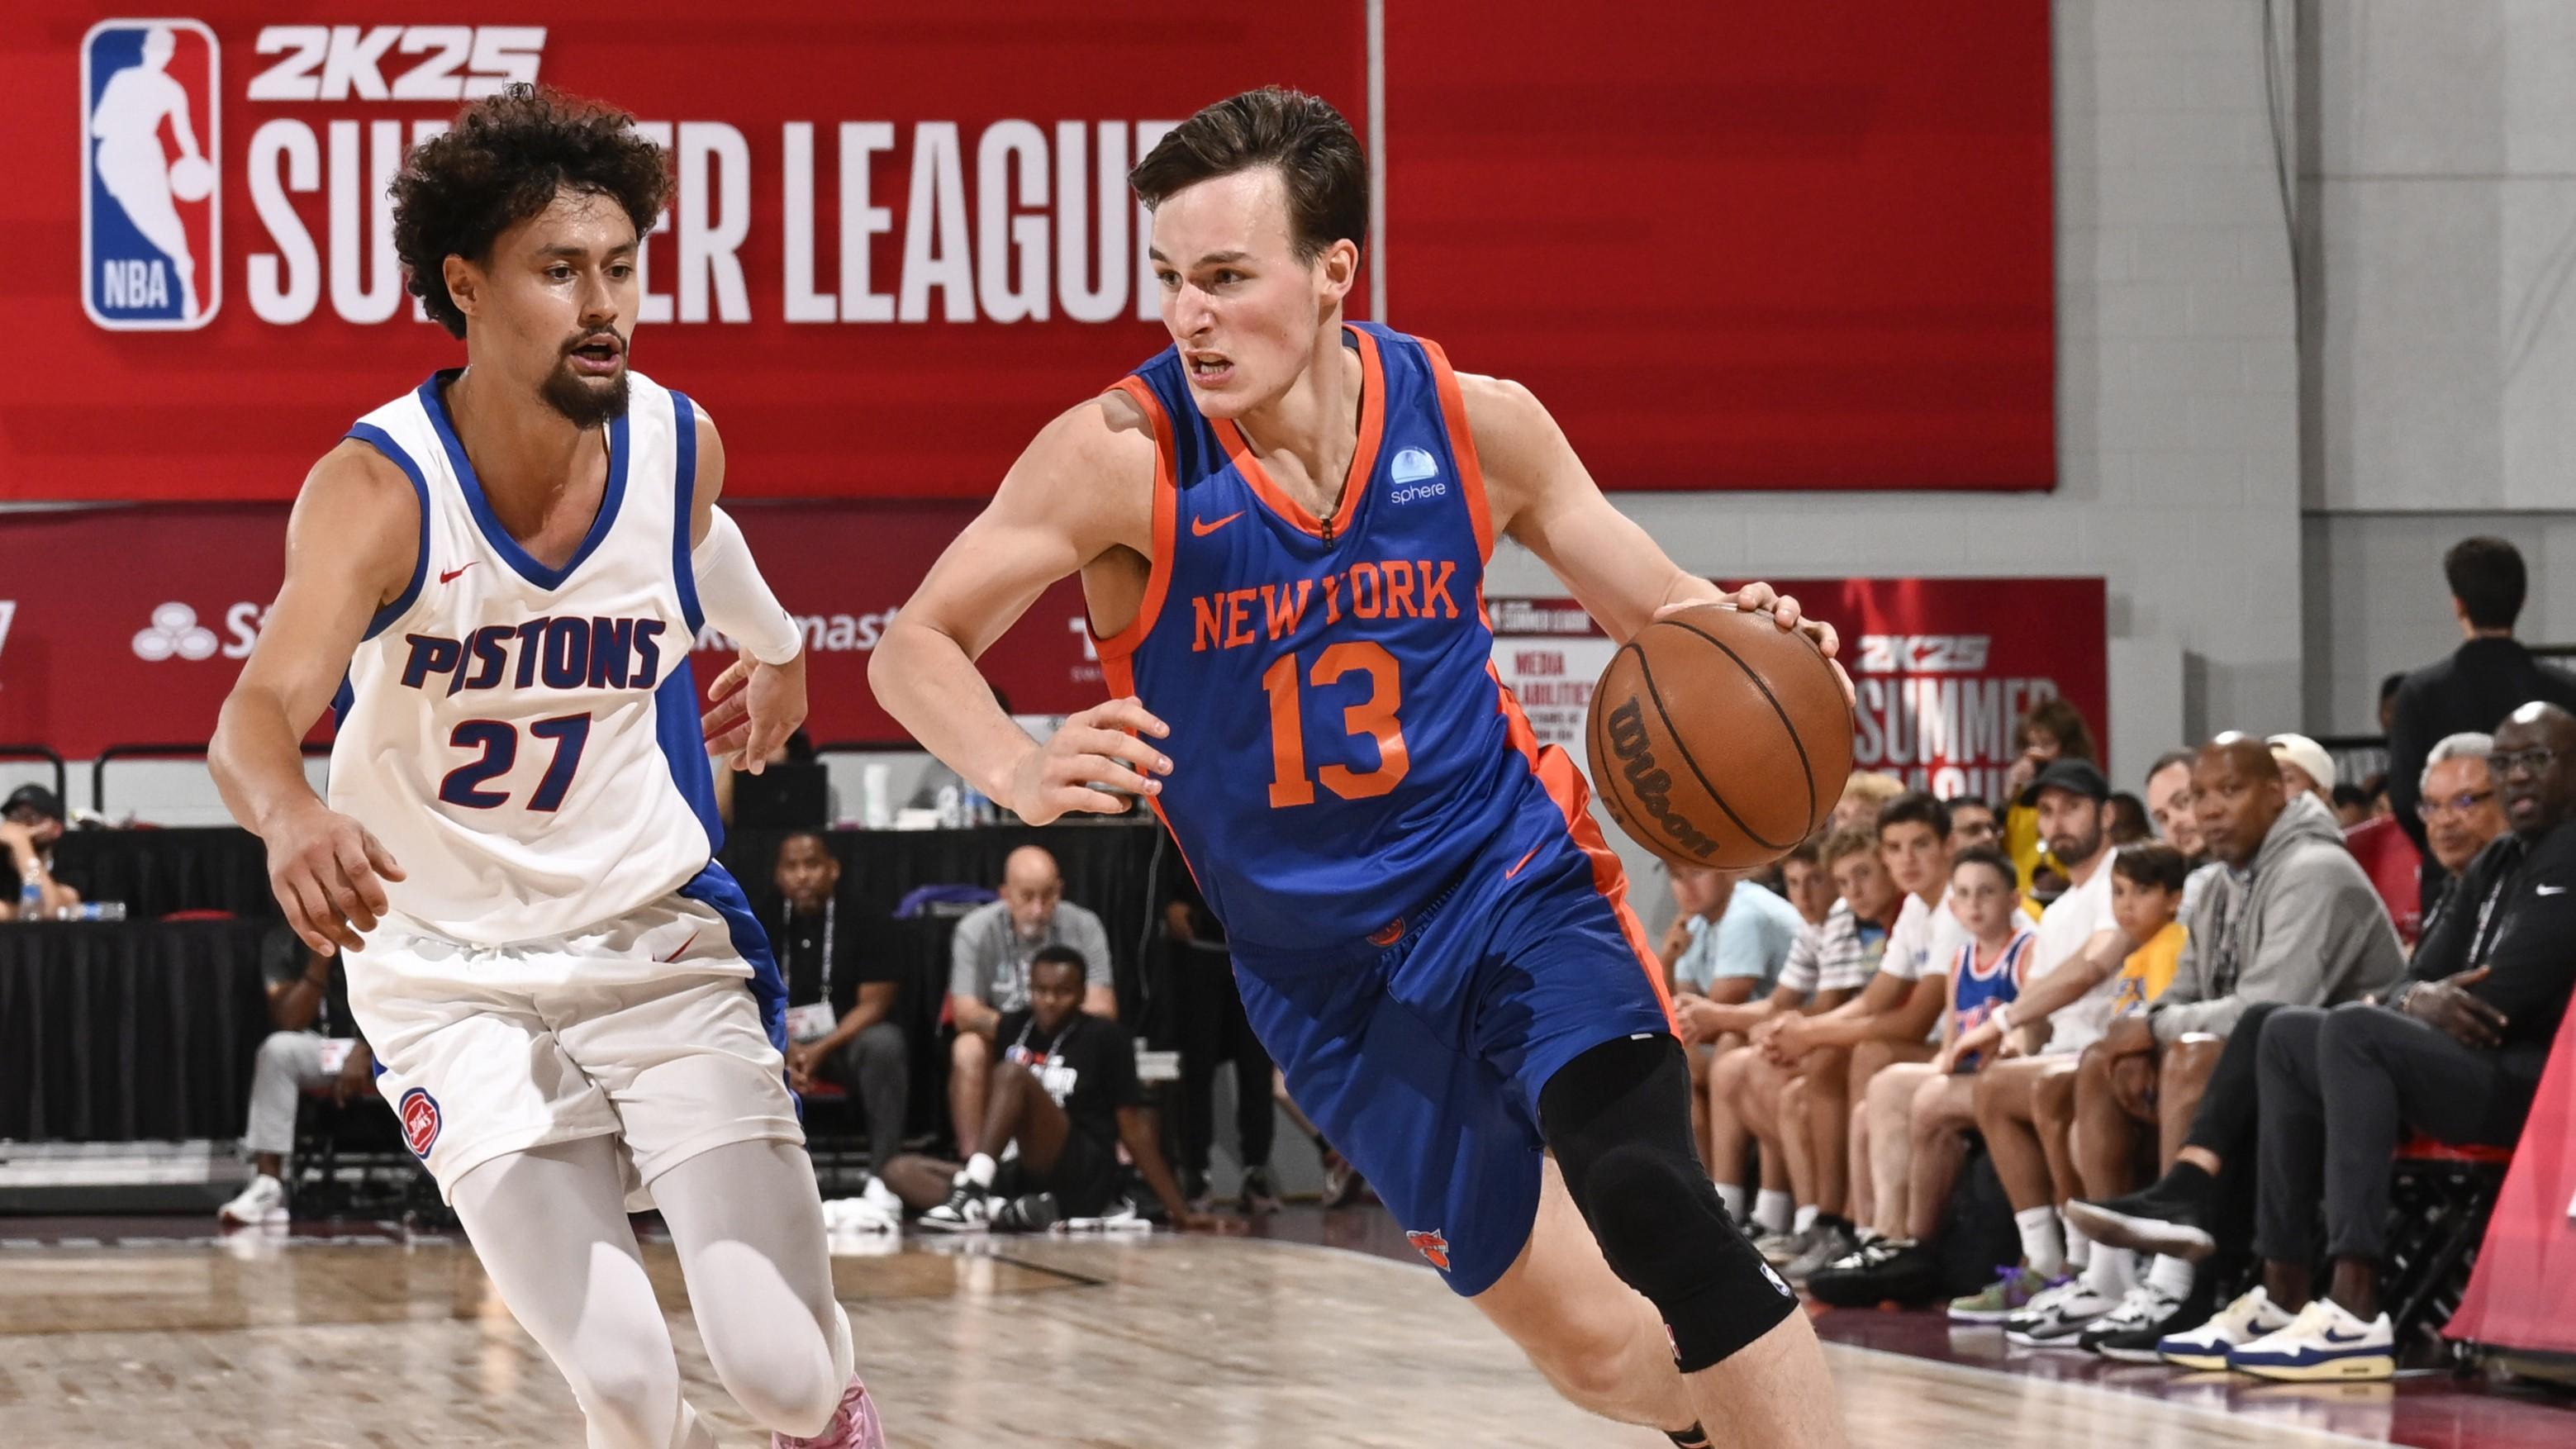 LAS VEGAS, NV - JULY 19: Tyler Kolek #13 of the New York Knicks goes to the basket during the game on July 19, 2024 at the Cox Pavilion in Las Vegas, Nevada